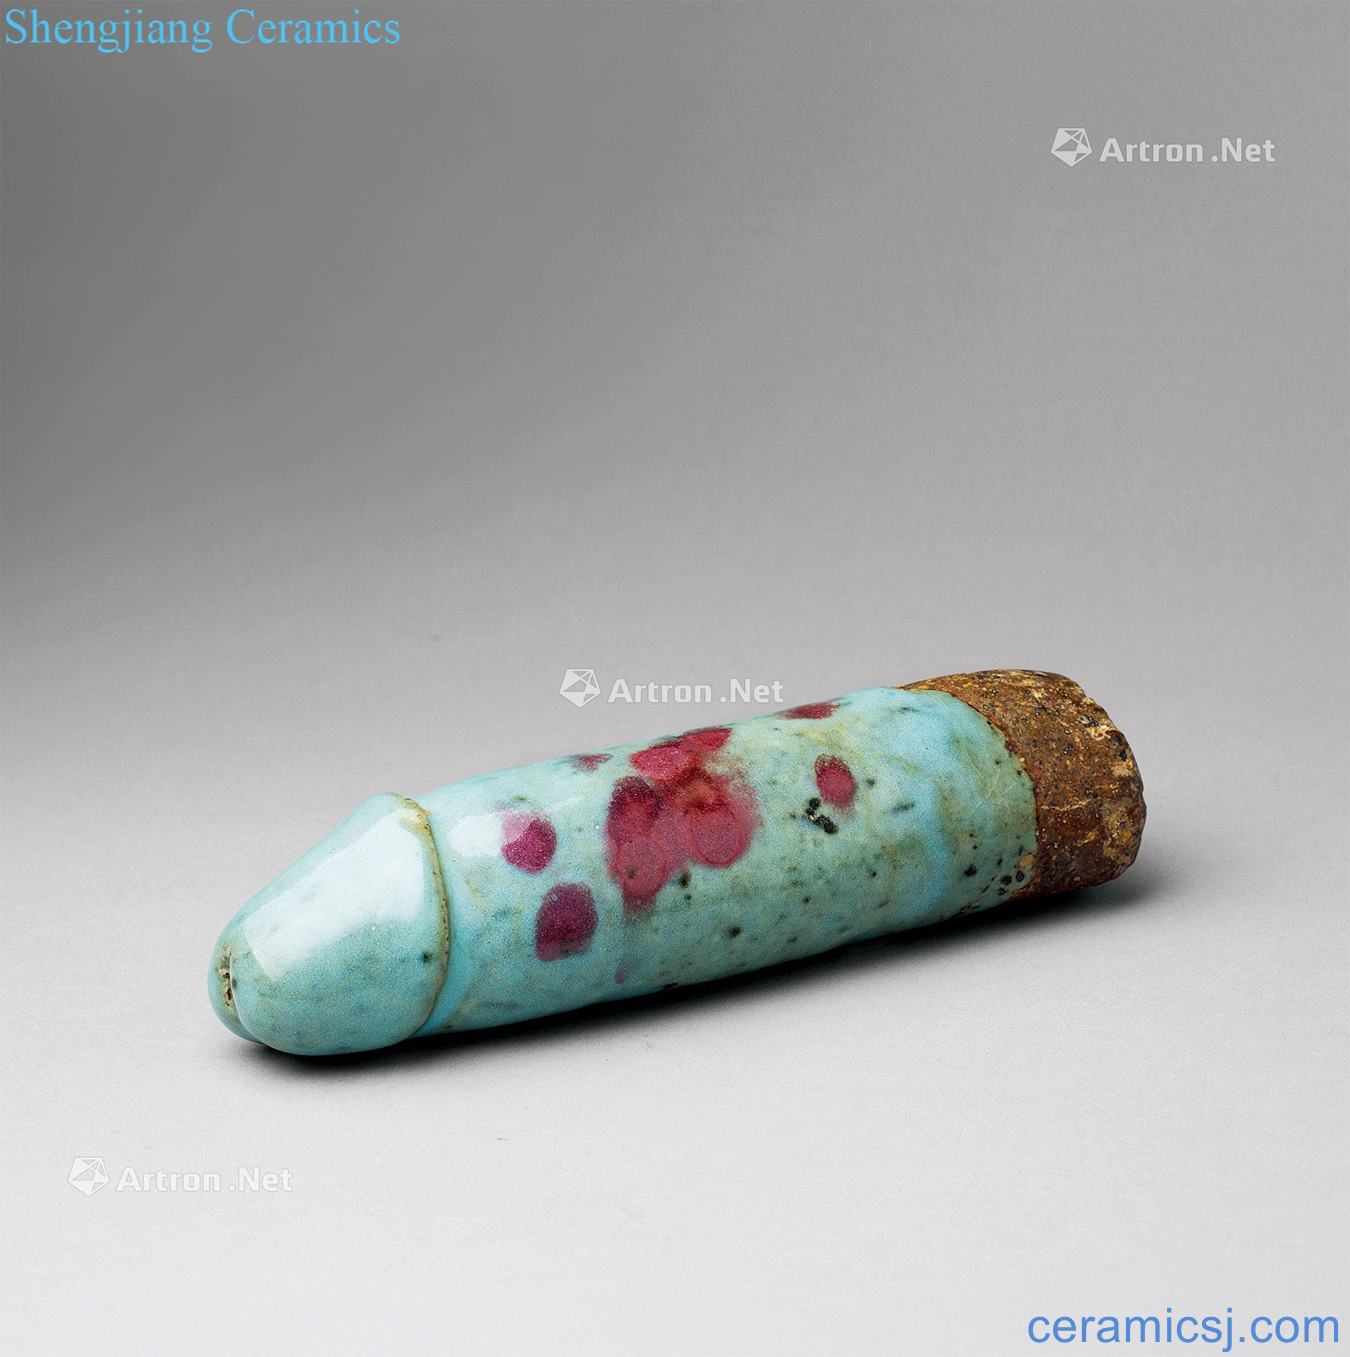 The yuan dynasty Porcelain masterpieces progenitor for